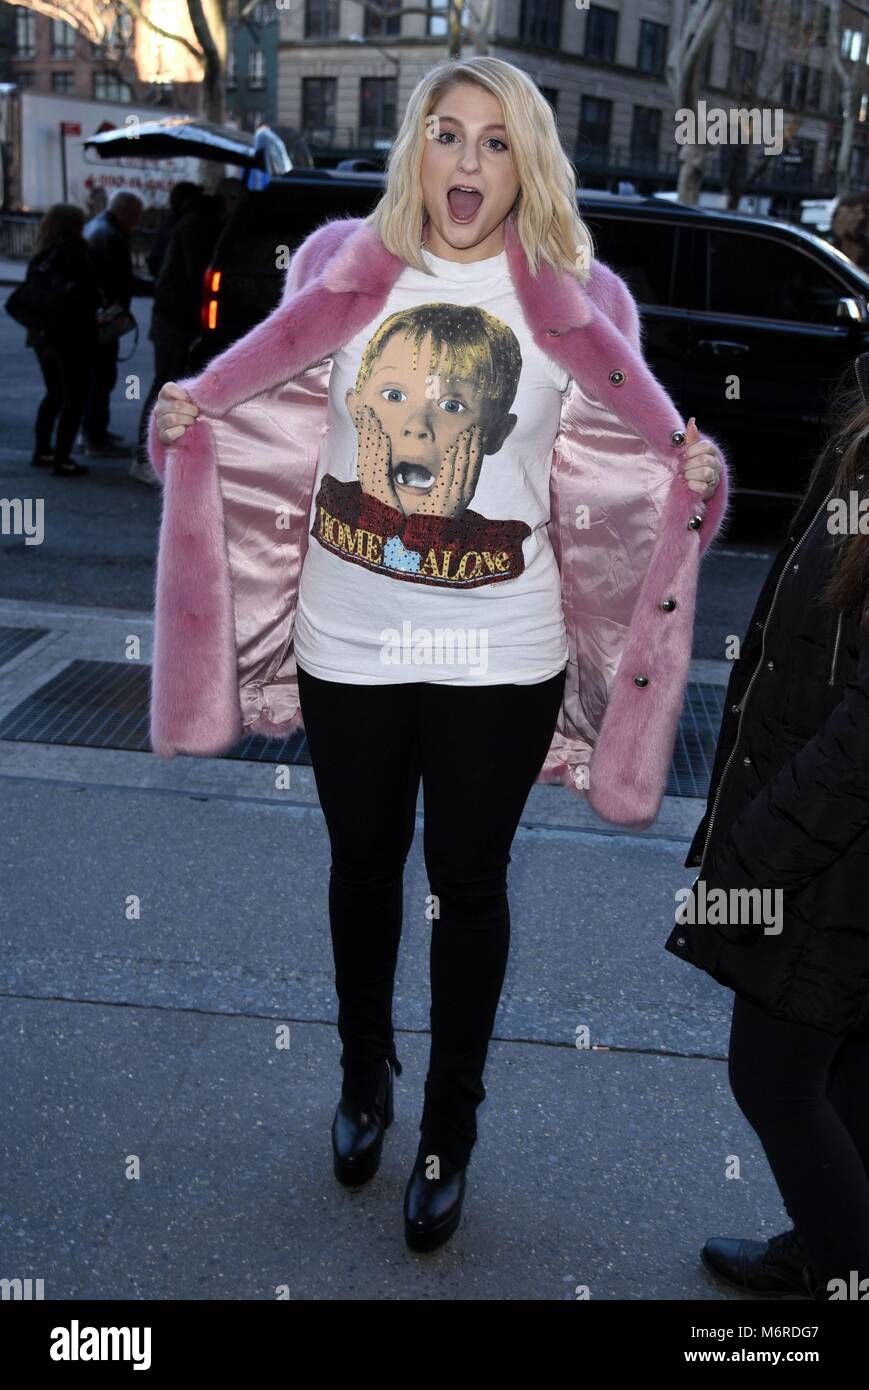 New York, NY, USA. 6th Mar, 2018. Meghan Trainor, seen at Elvis Duran and the Morning Show on Z-100, wearing a Macaulay Culkin Home Alone shirt. out and about for Celebrity Candids - TUE, New York, NY March 6, 2018. Credit: Derek Storm/Everett Collection/Alamy Live News Stock Photo